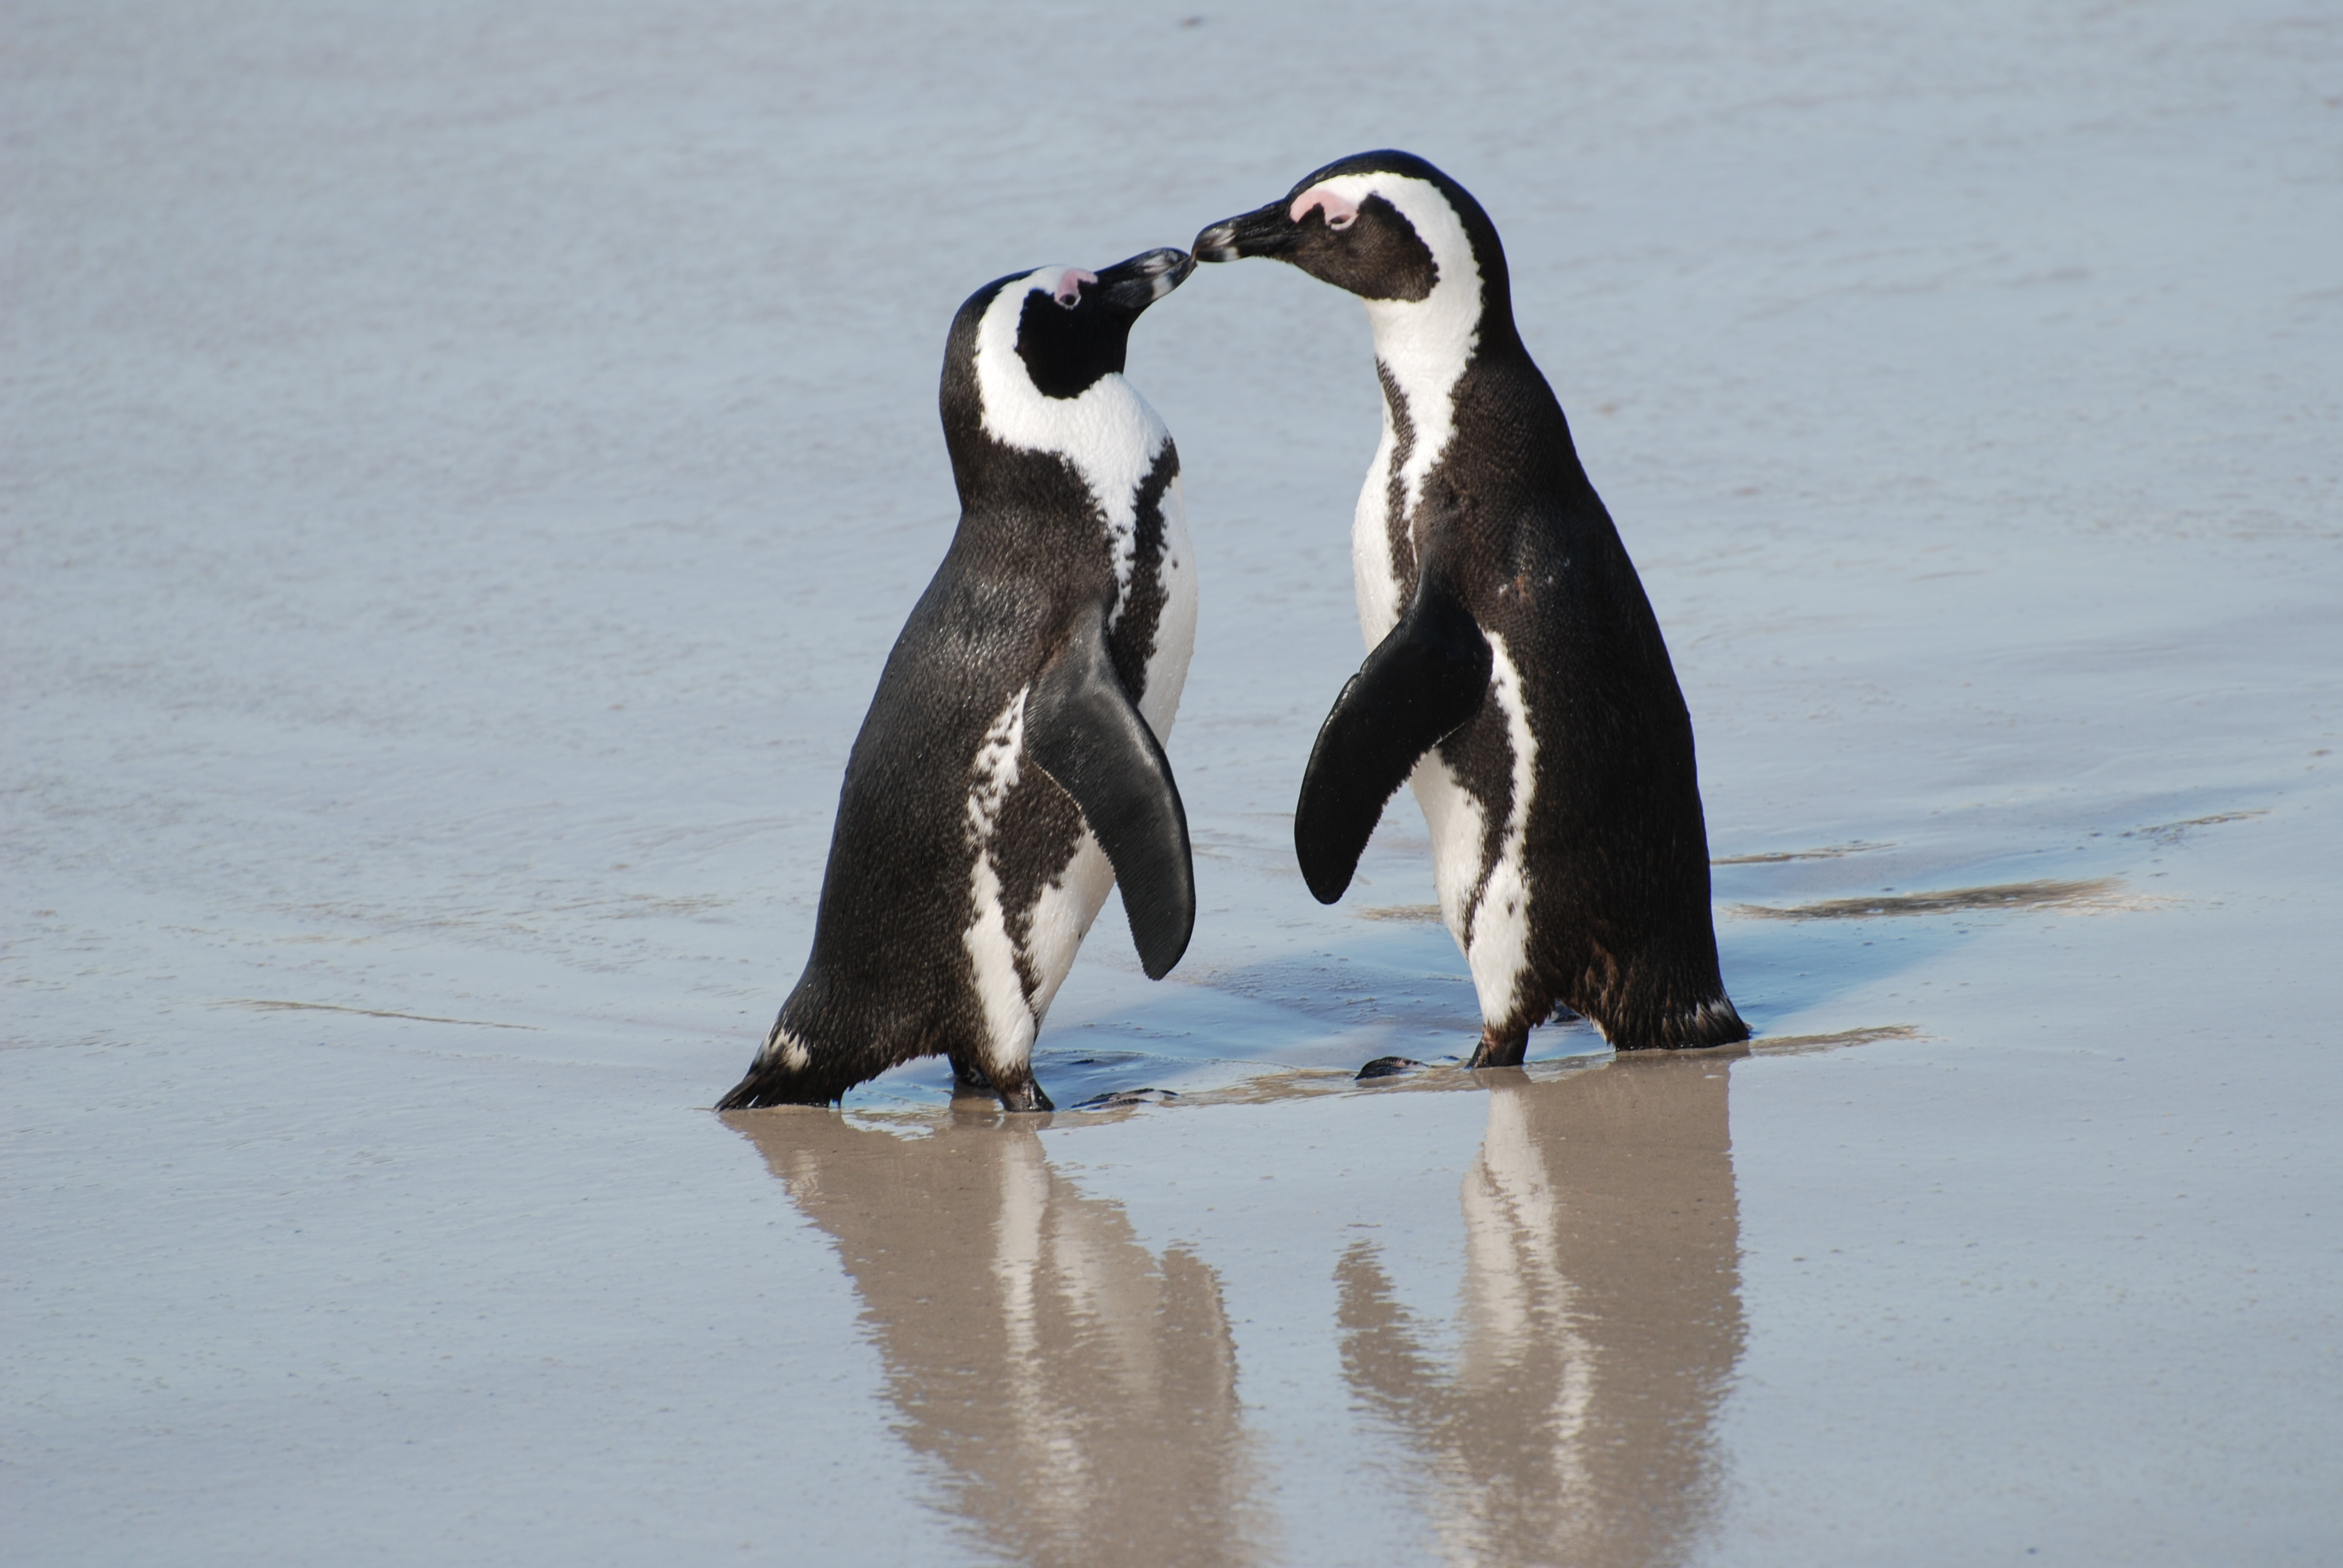 File:A pair of African penguins, Boulders Beach, South Africa.jpg